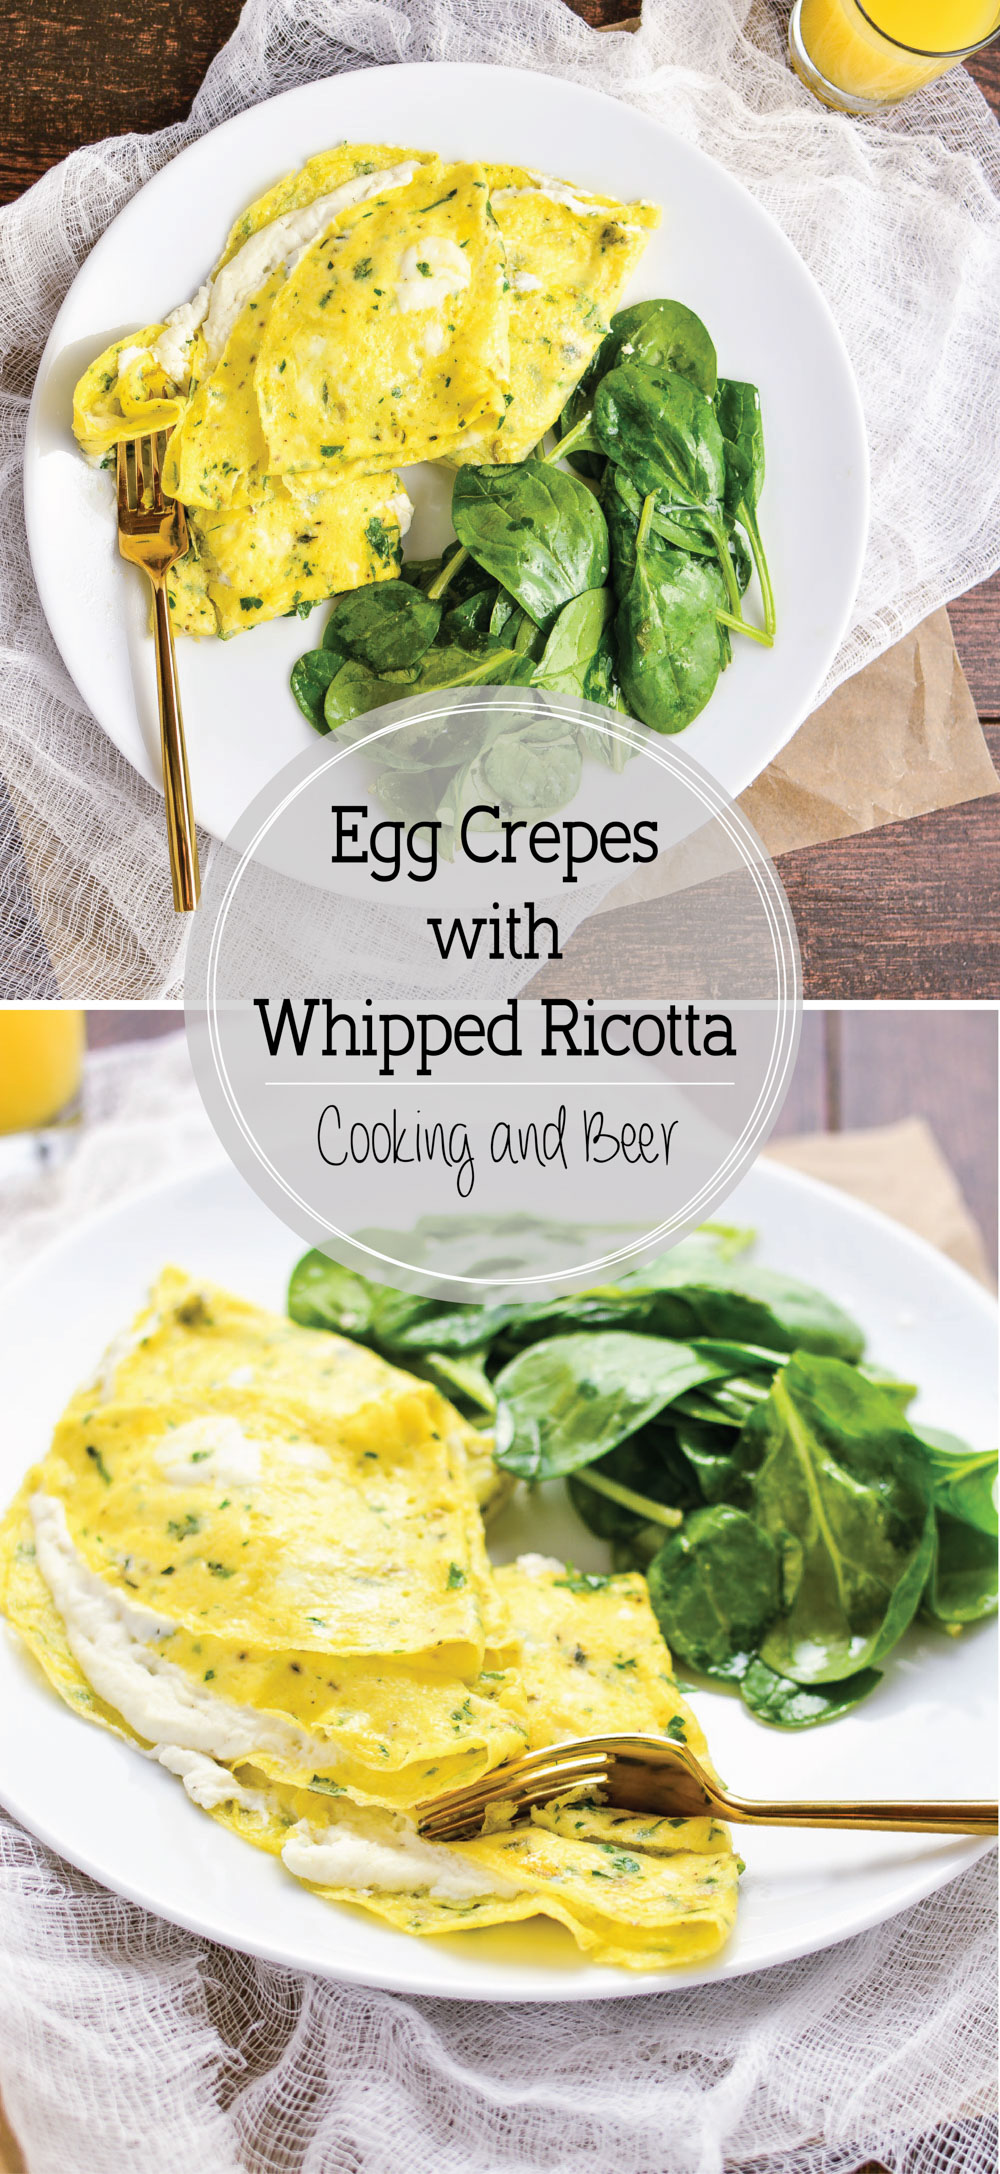 Mix up your egg routine with these Egg Crepes with Whipped Ricotta! They are a bright and flavorful breakfast or brunch recipe!